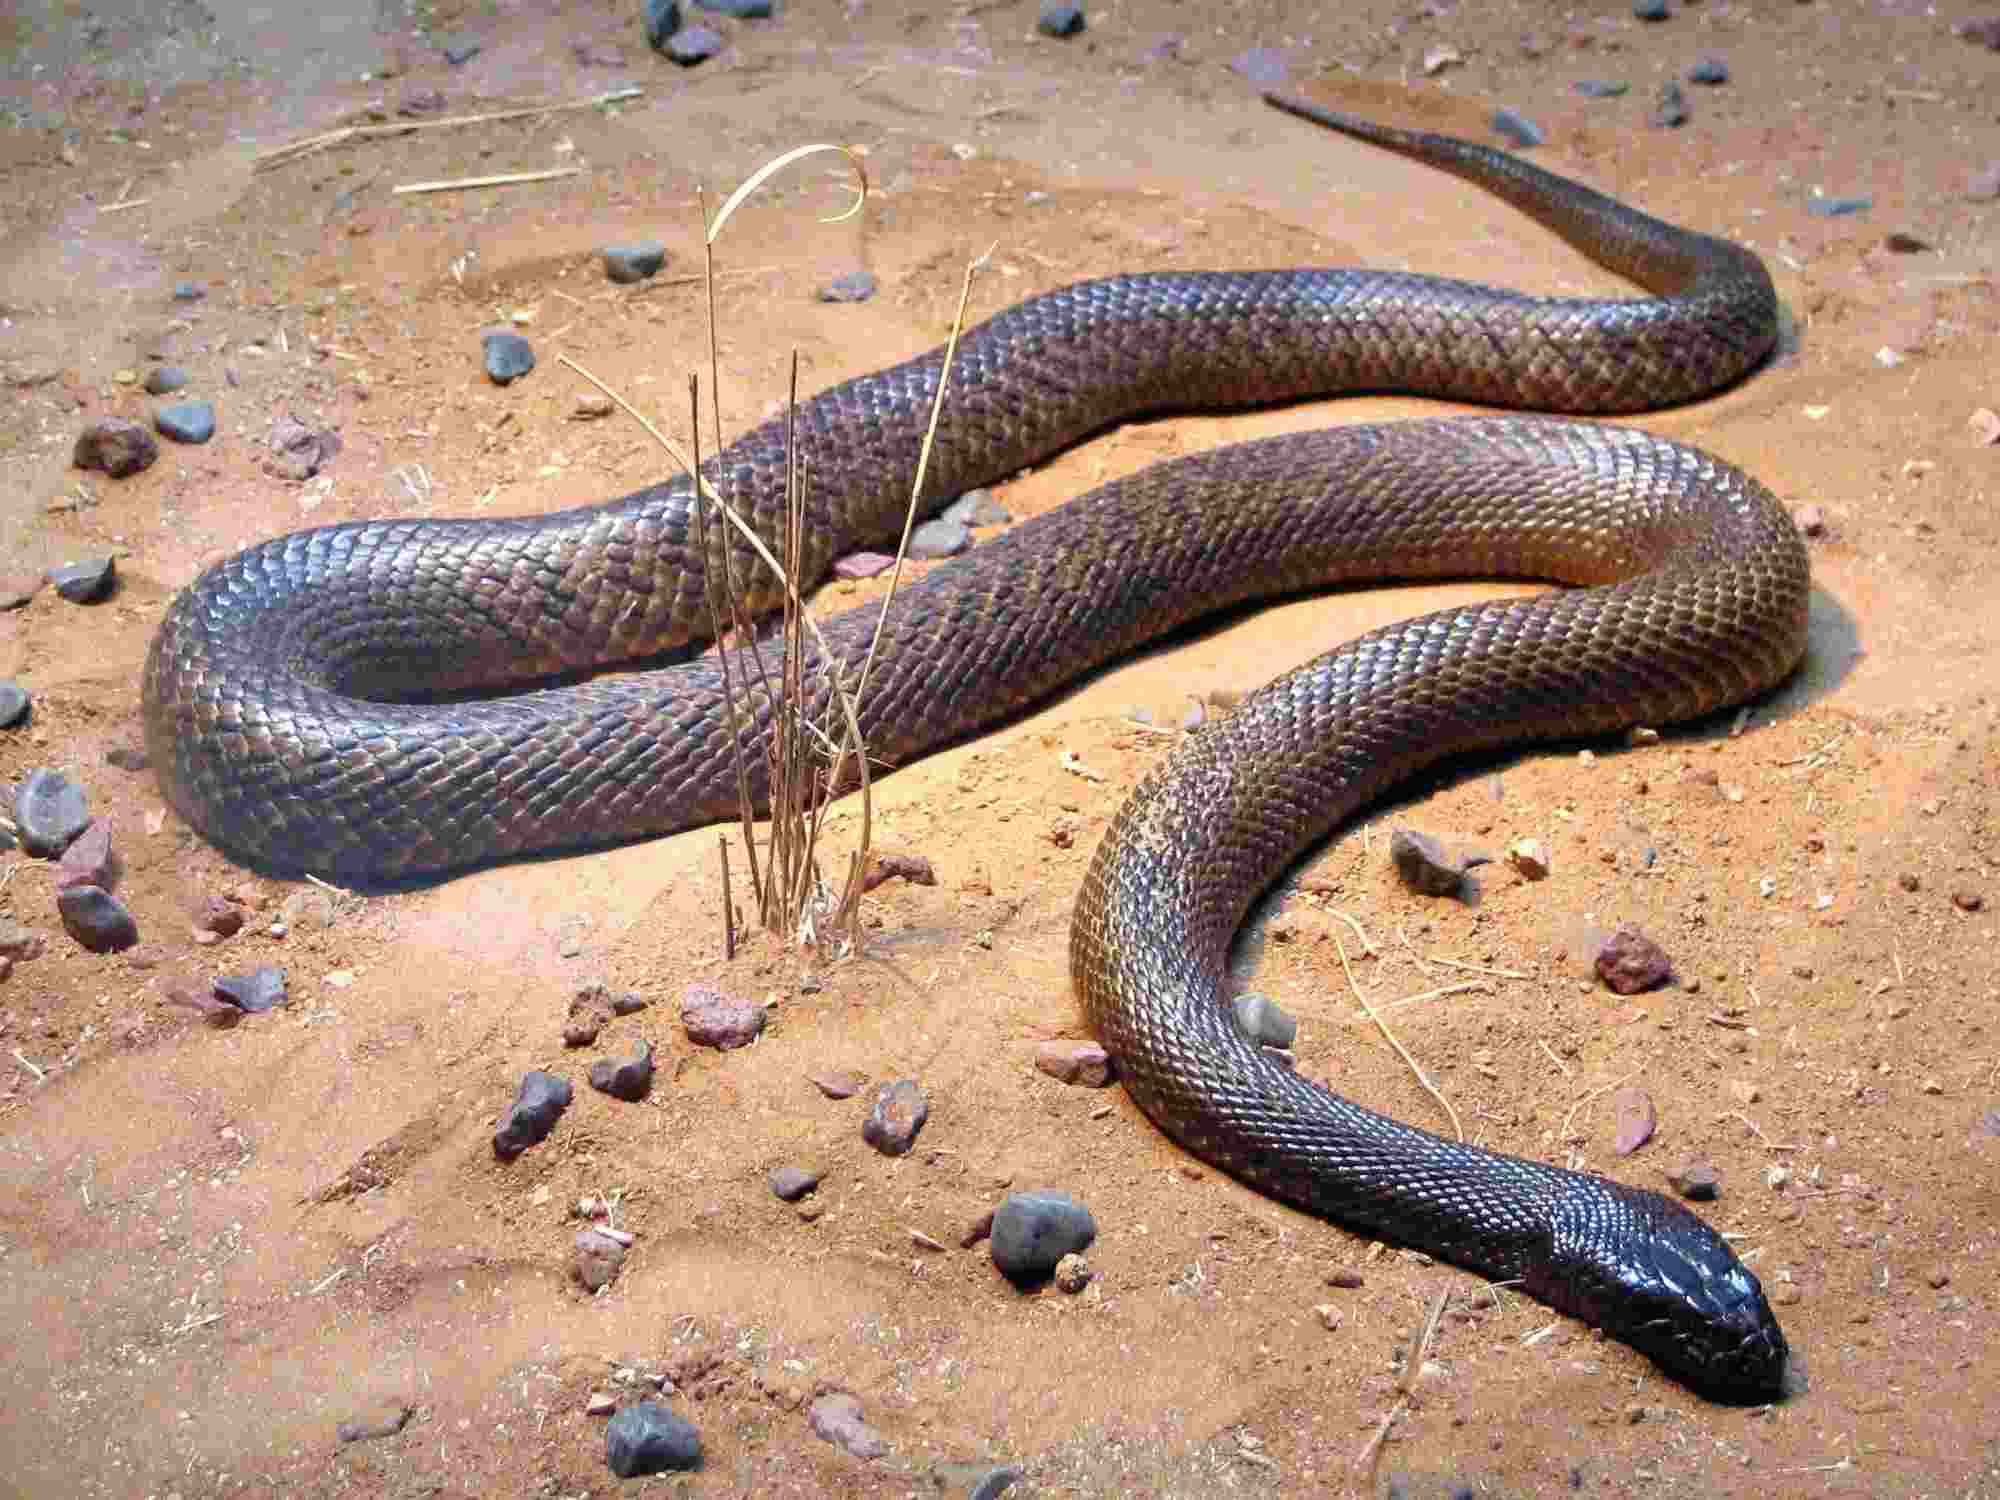 Inland taipan is the most venomous snake in the world